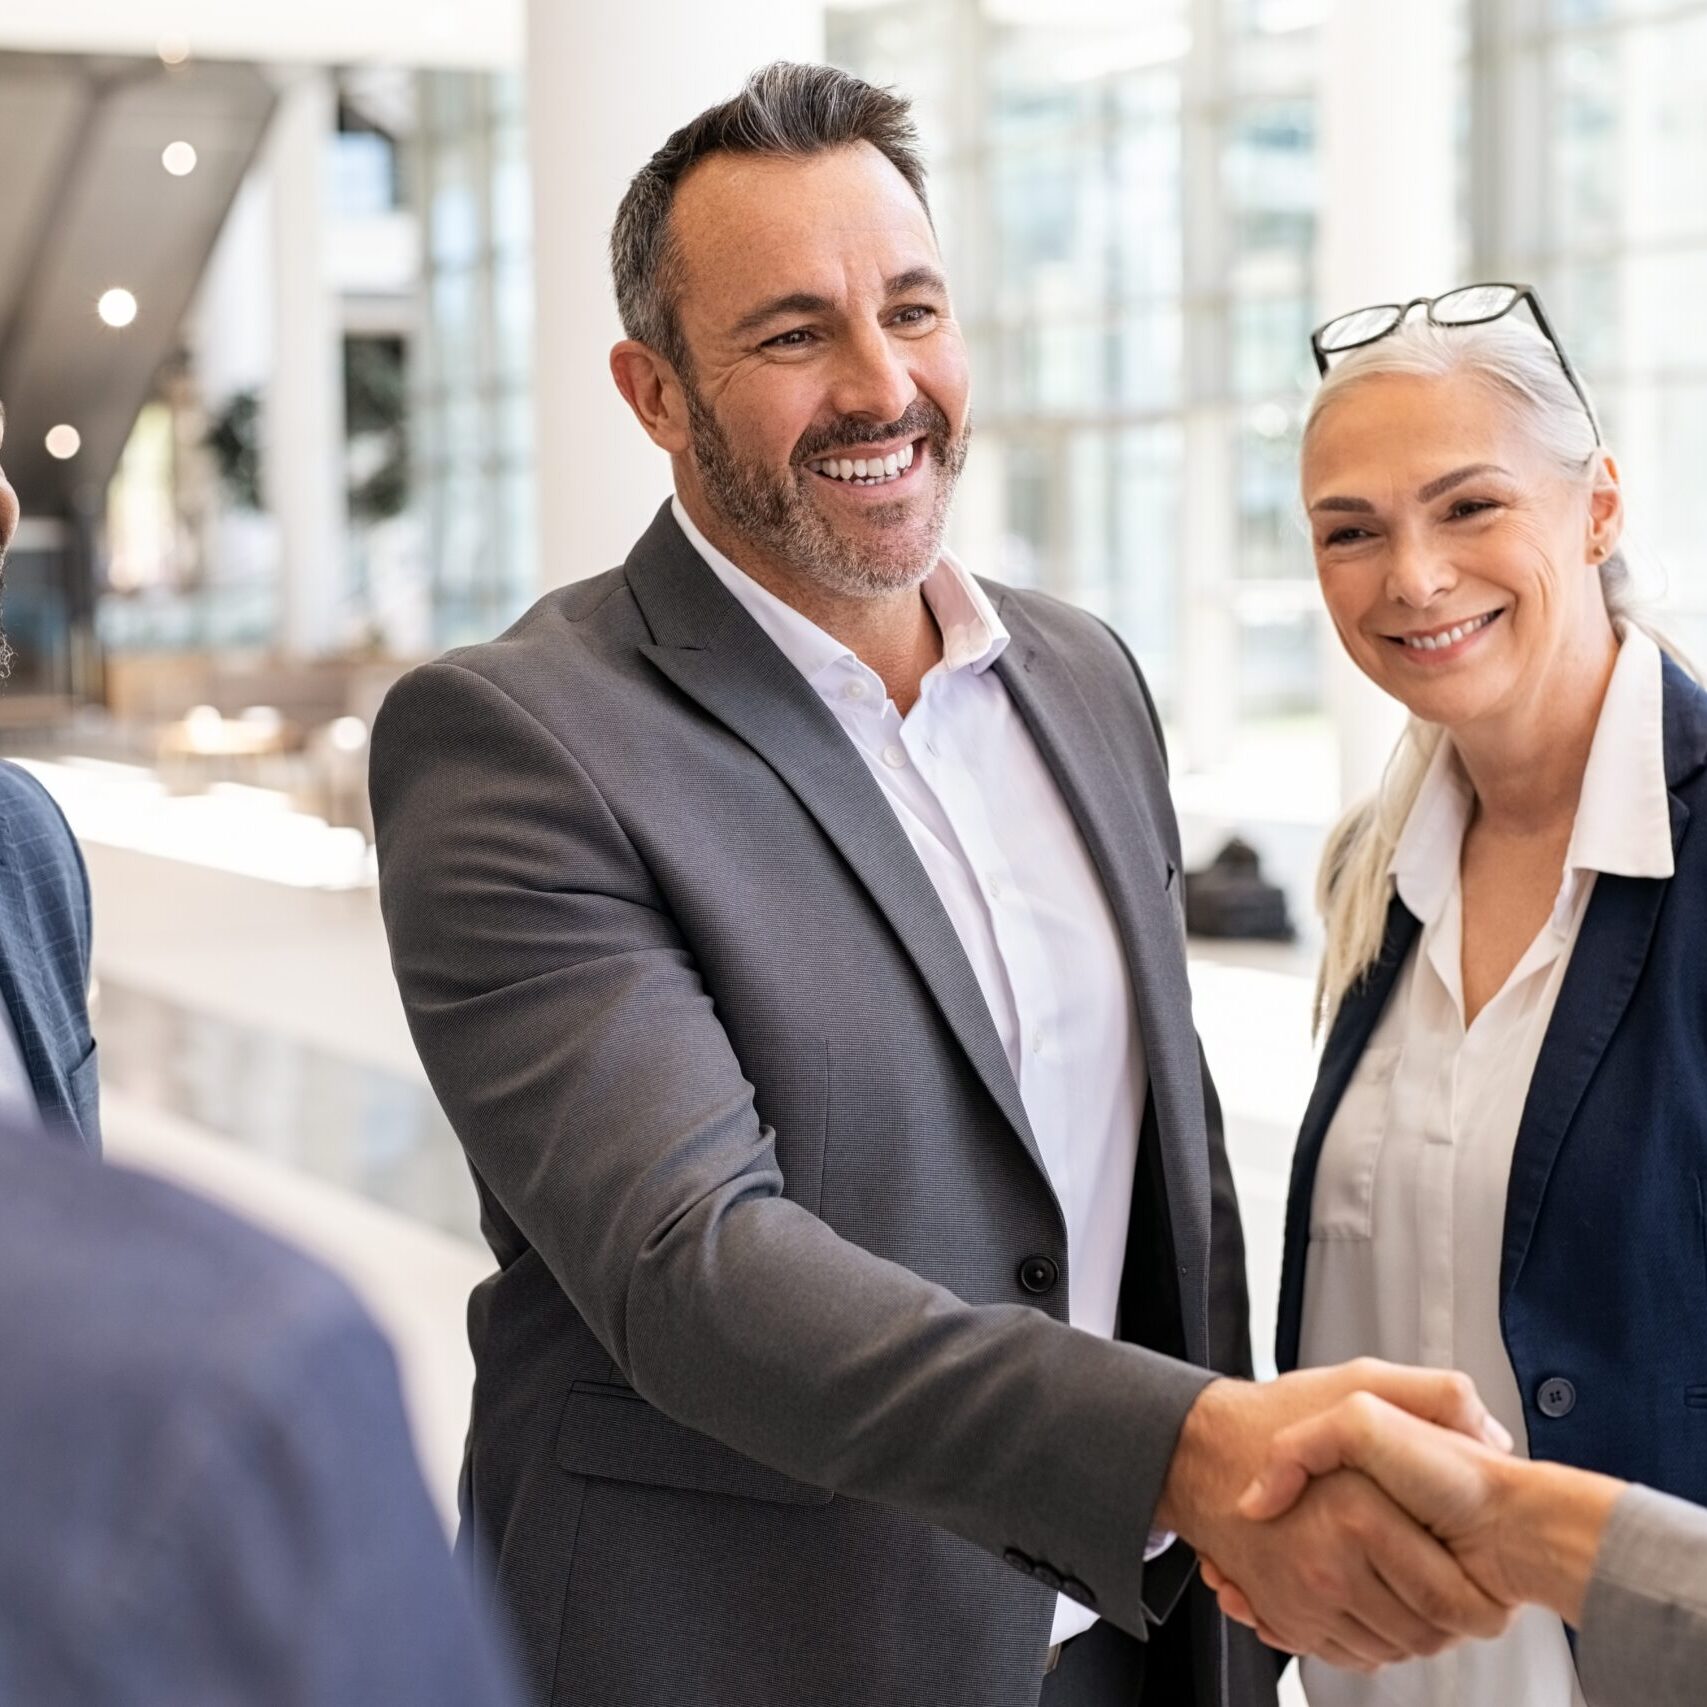 Mature businessman shaking hands with young woman in group